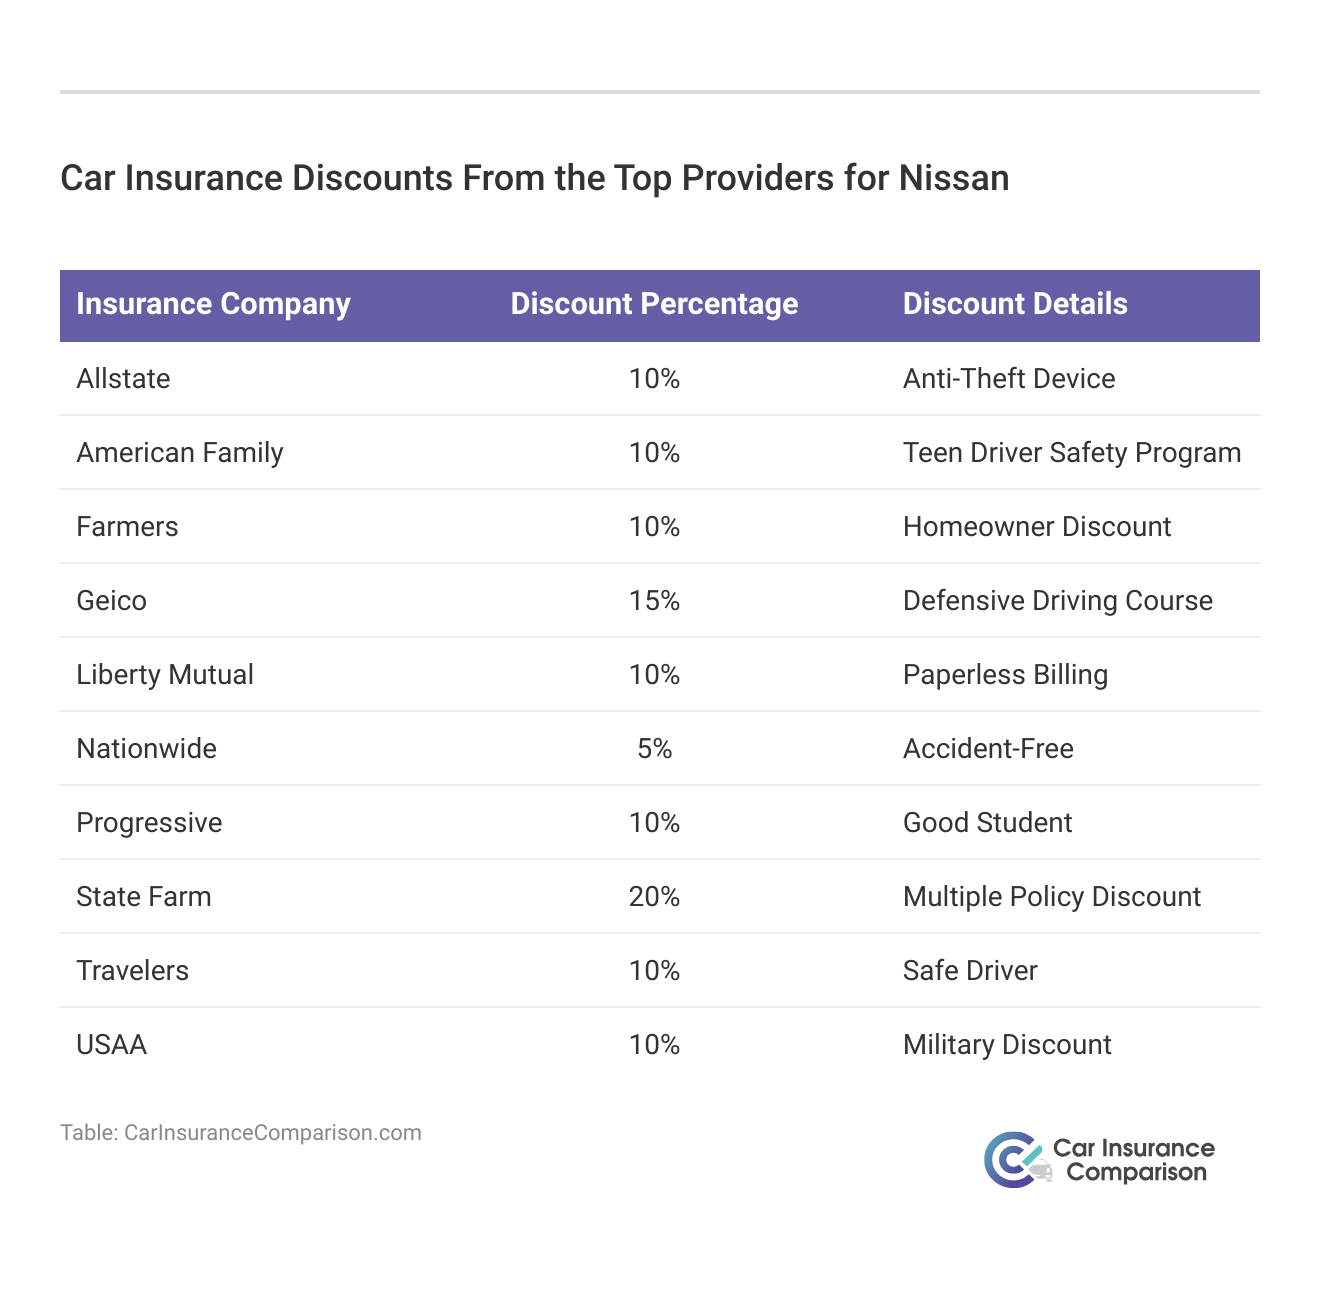 <h3>Car Insurance Discounts From the Top Providers for Nissan</h3>